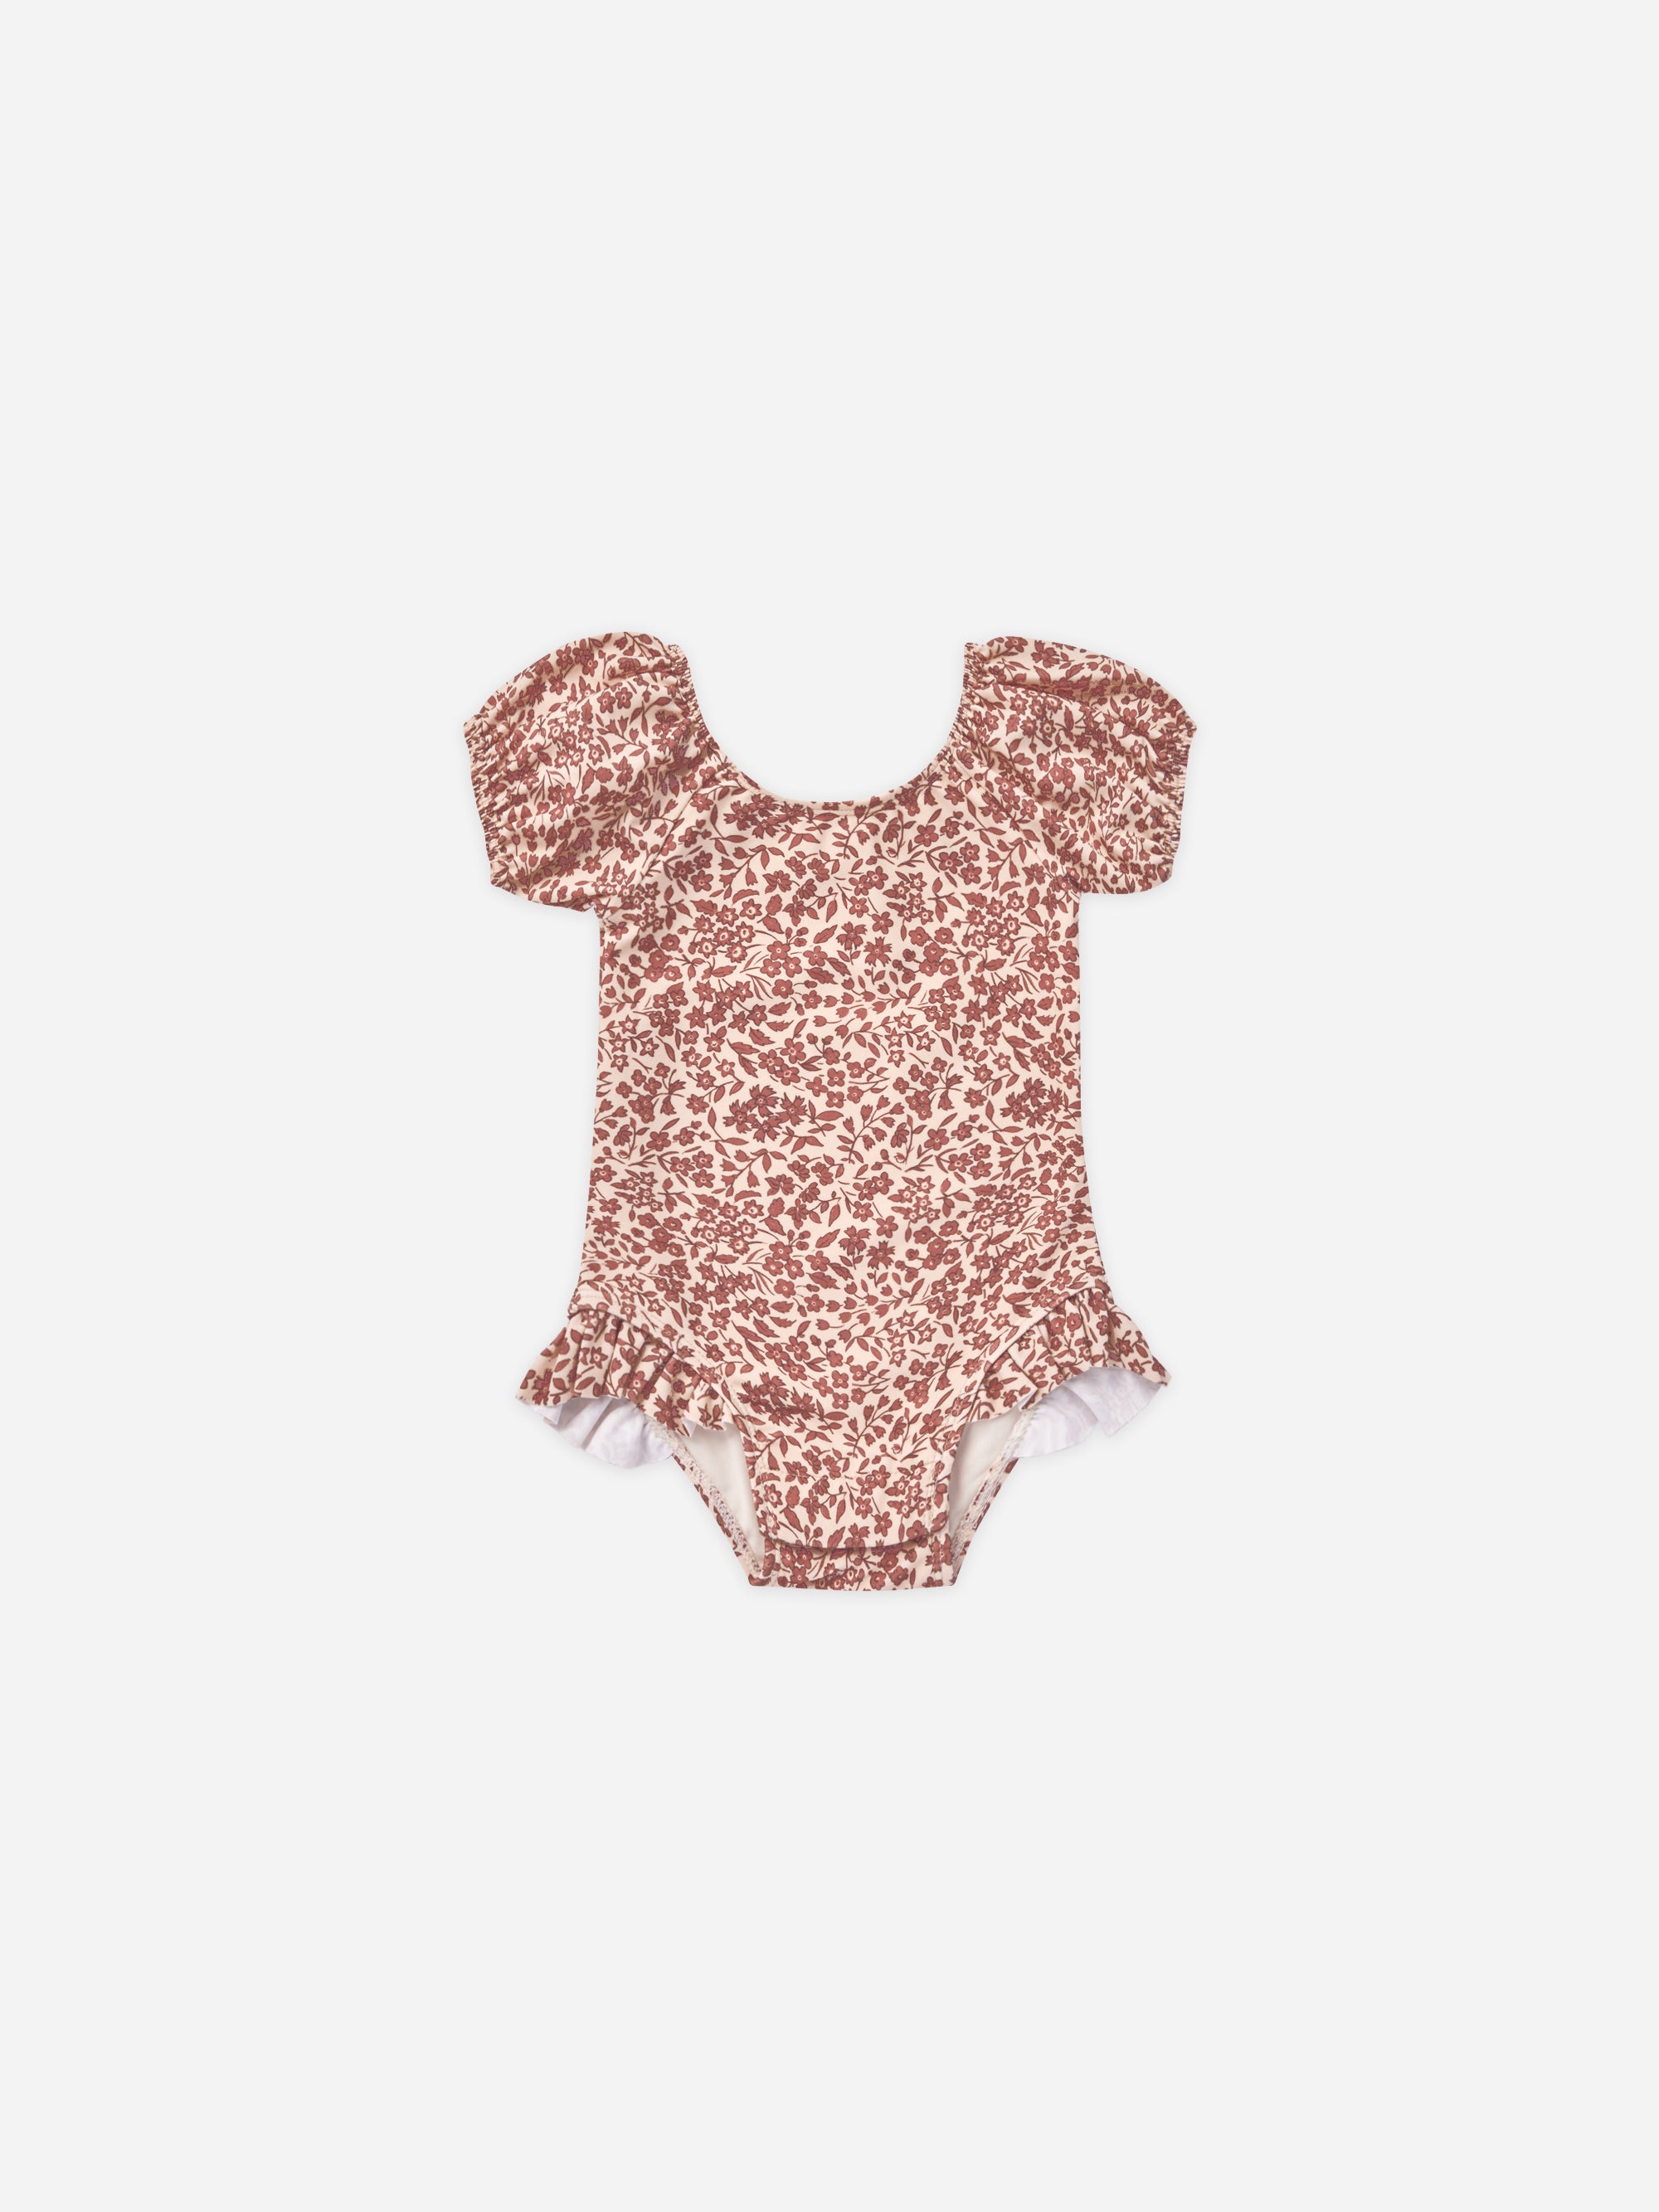 Catalina One-Piece Swimsuit || Flower Field - Rylee + Cru | Kids Clothes | Trendy Baby Clothes | Modern Infant Outfits |